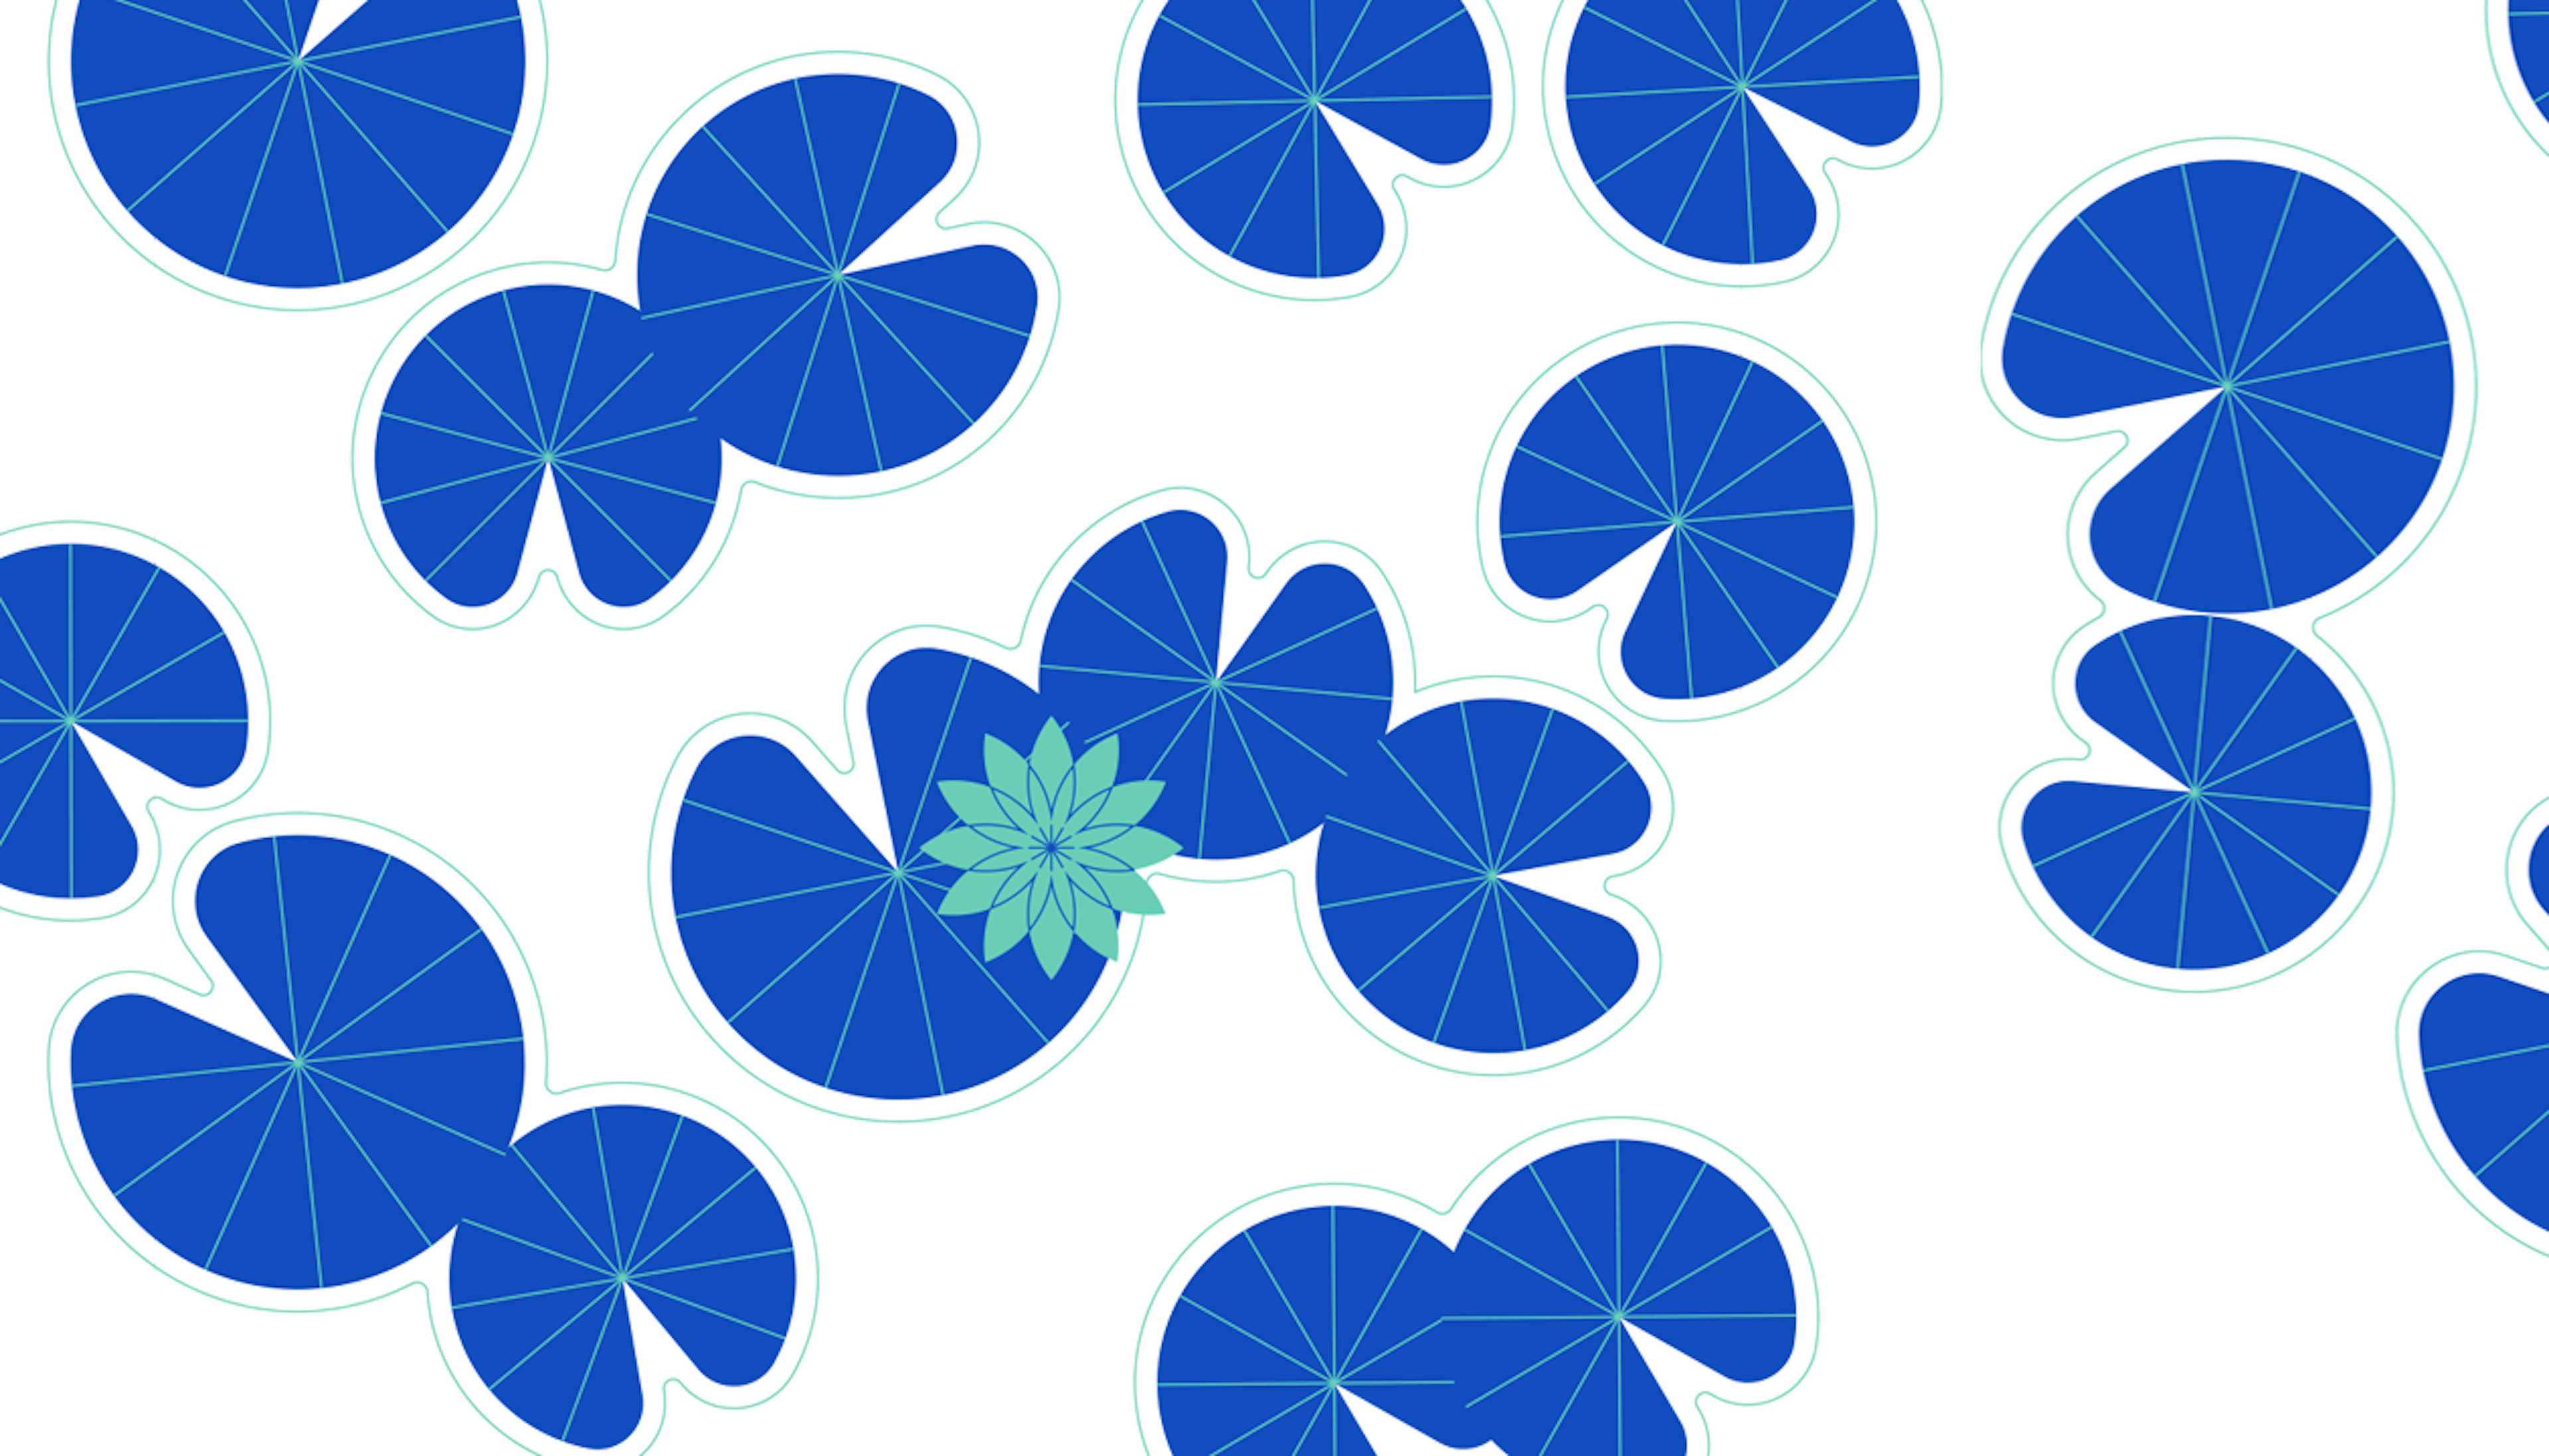 Illustration of lily pads floating in a lake